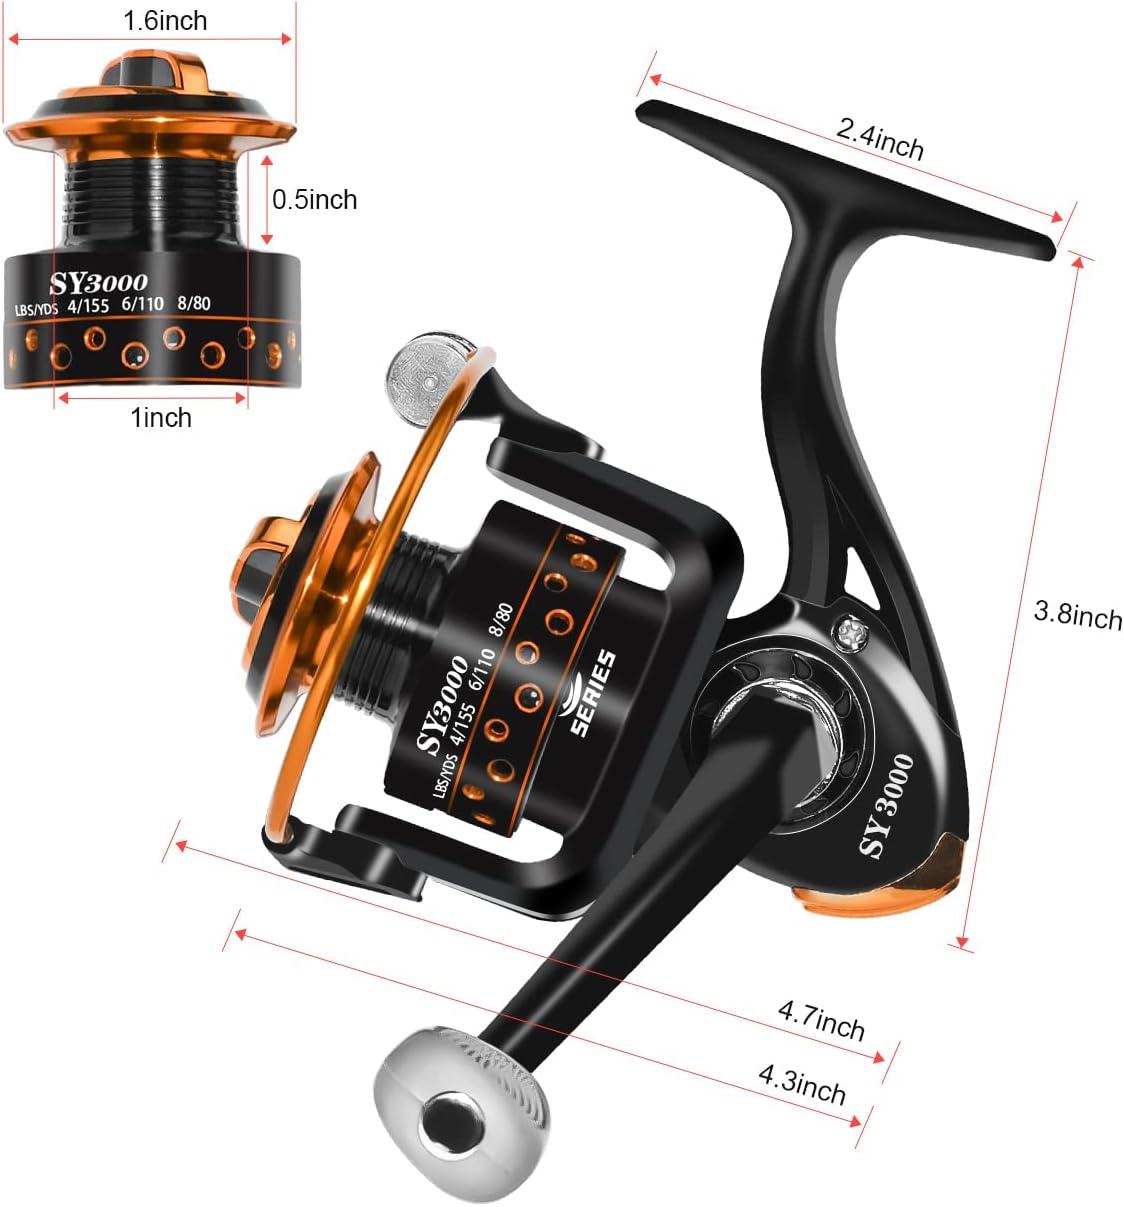 Summer and Centron Spinning Reels, 12 +1 BB Light Weight, Ultra Smooth  Powerful, Size 3000 is Perfect for Ultralight/Summer Fishing by QINGLER